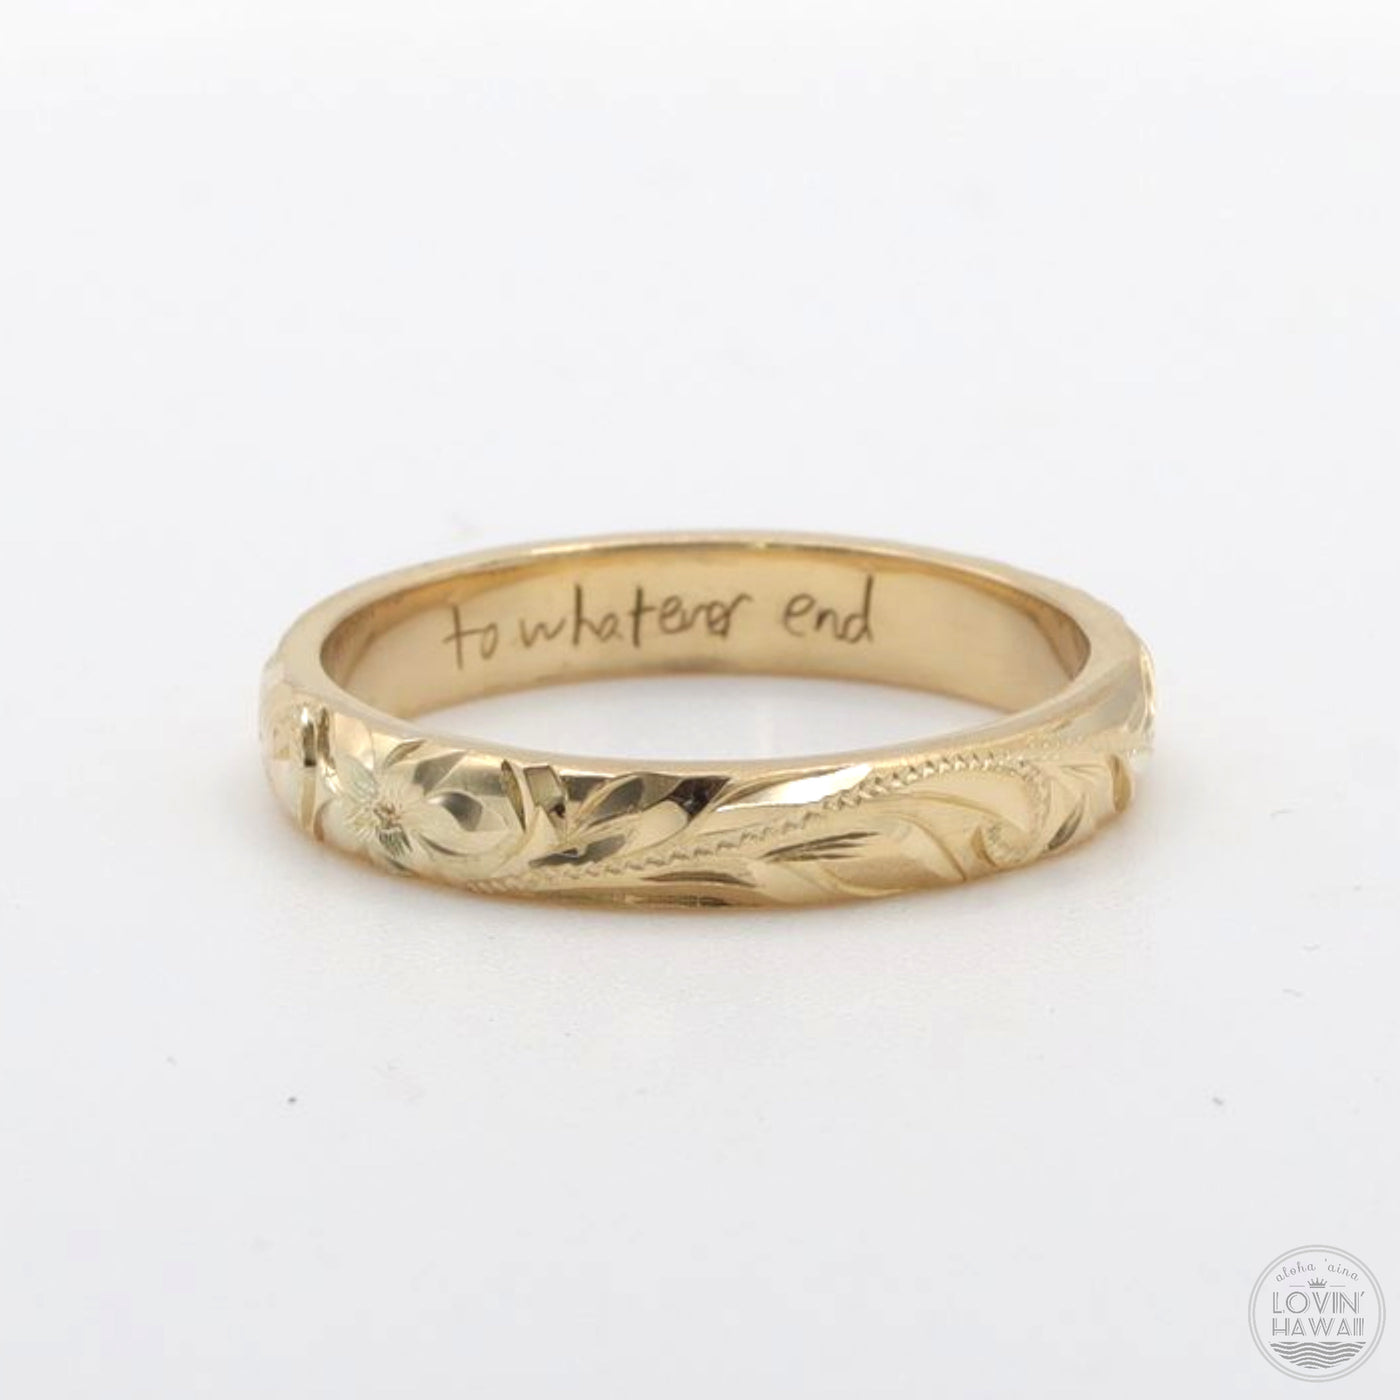 Gold Hawaiian Wedding Rings, Hand Engraved Design, (3mm Width, Dome Style)